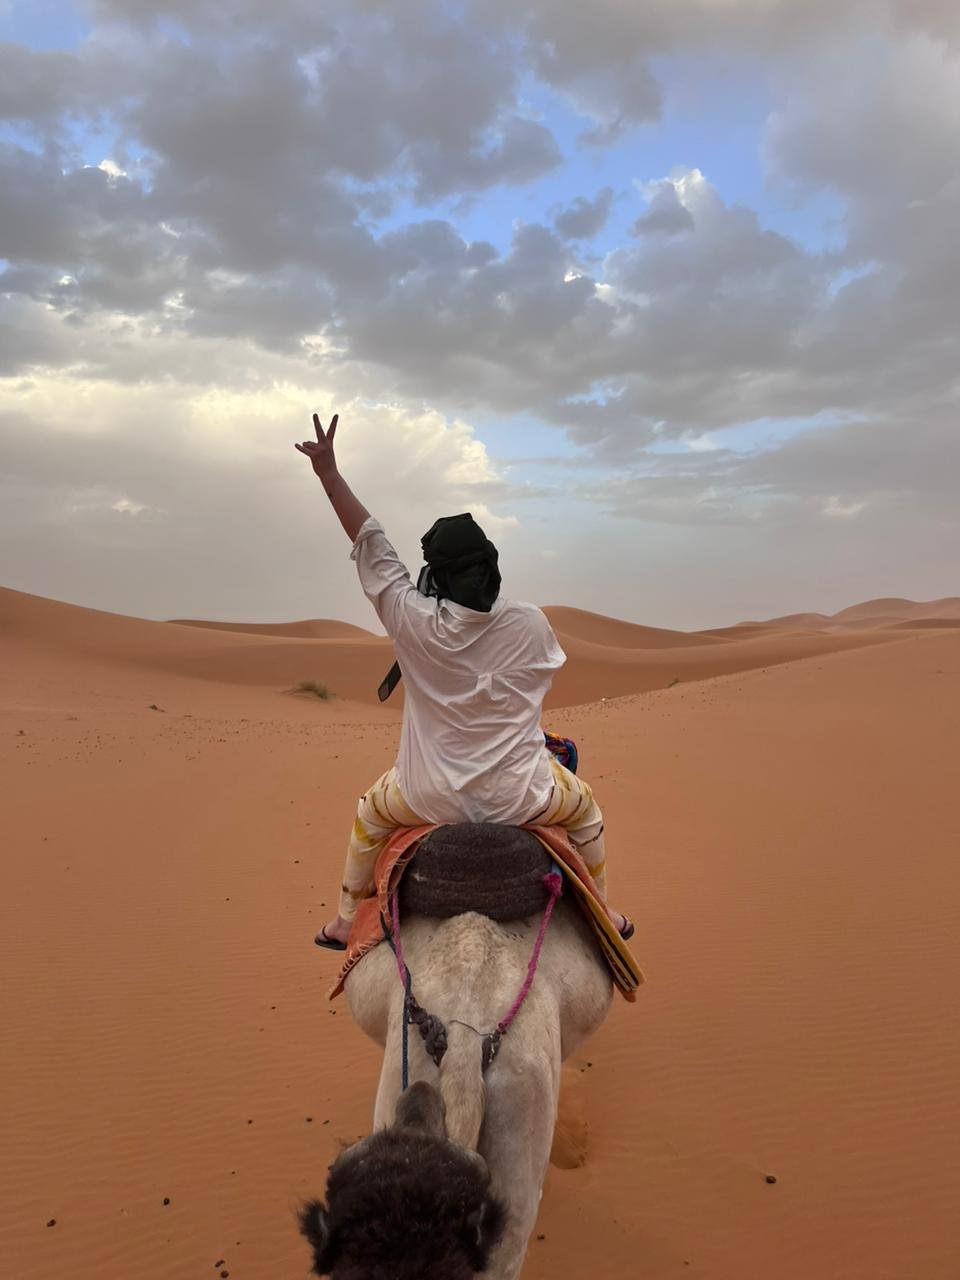 Exploring the Sahara Desert of Morocco on camelback, with the vast golden dunes stretching into the distance under the clear desert sky, creating a sense of adventurous exploration and connection with the desert landscape.